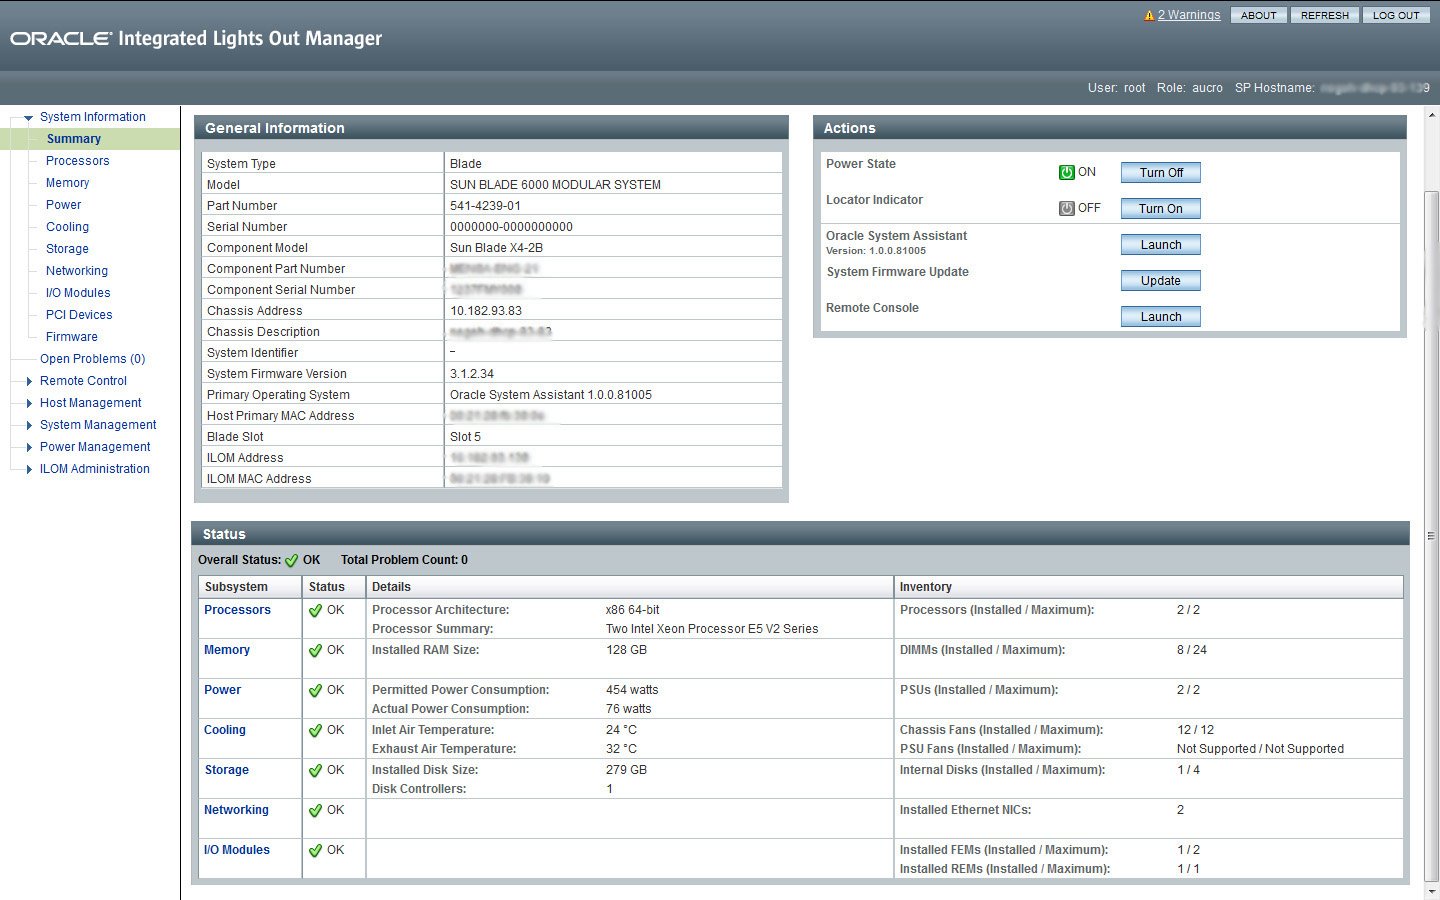 image:A screen capture showing the Oracle ILOM Summary screen.